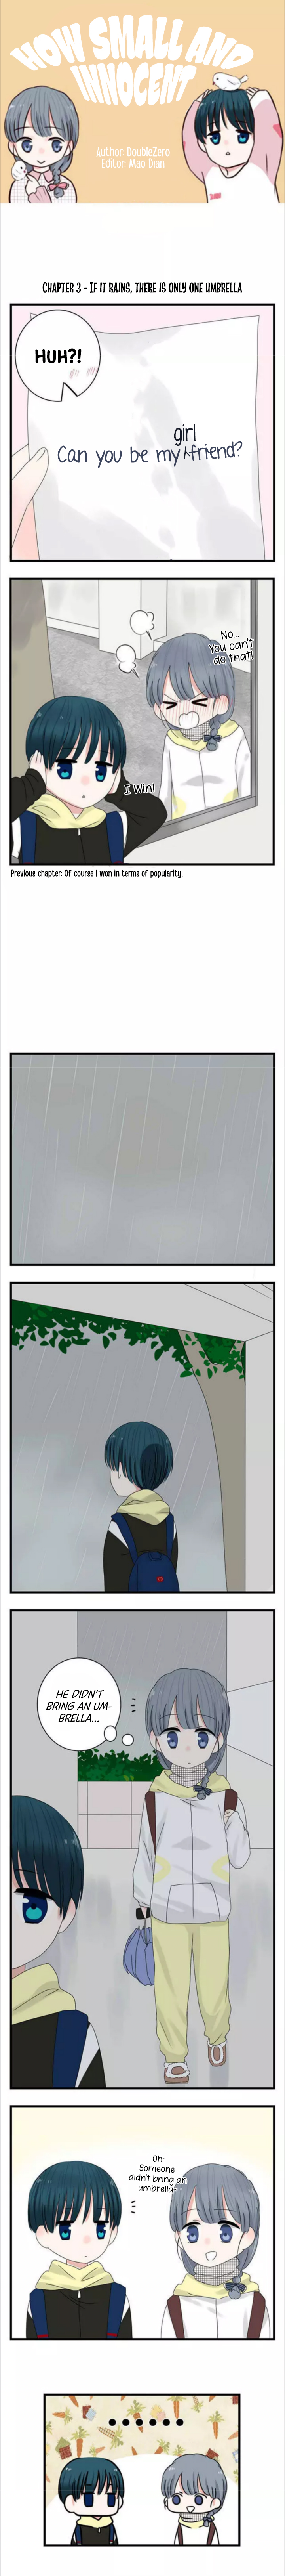 How Small and Innocent Ch. 3 If it rains, there is only one umbrella